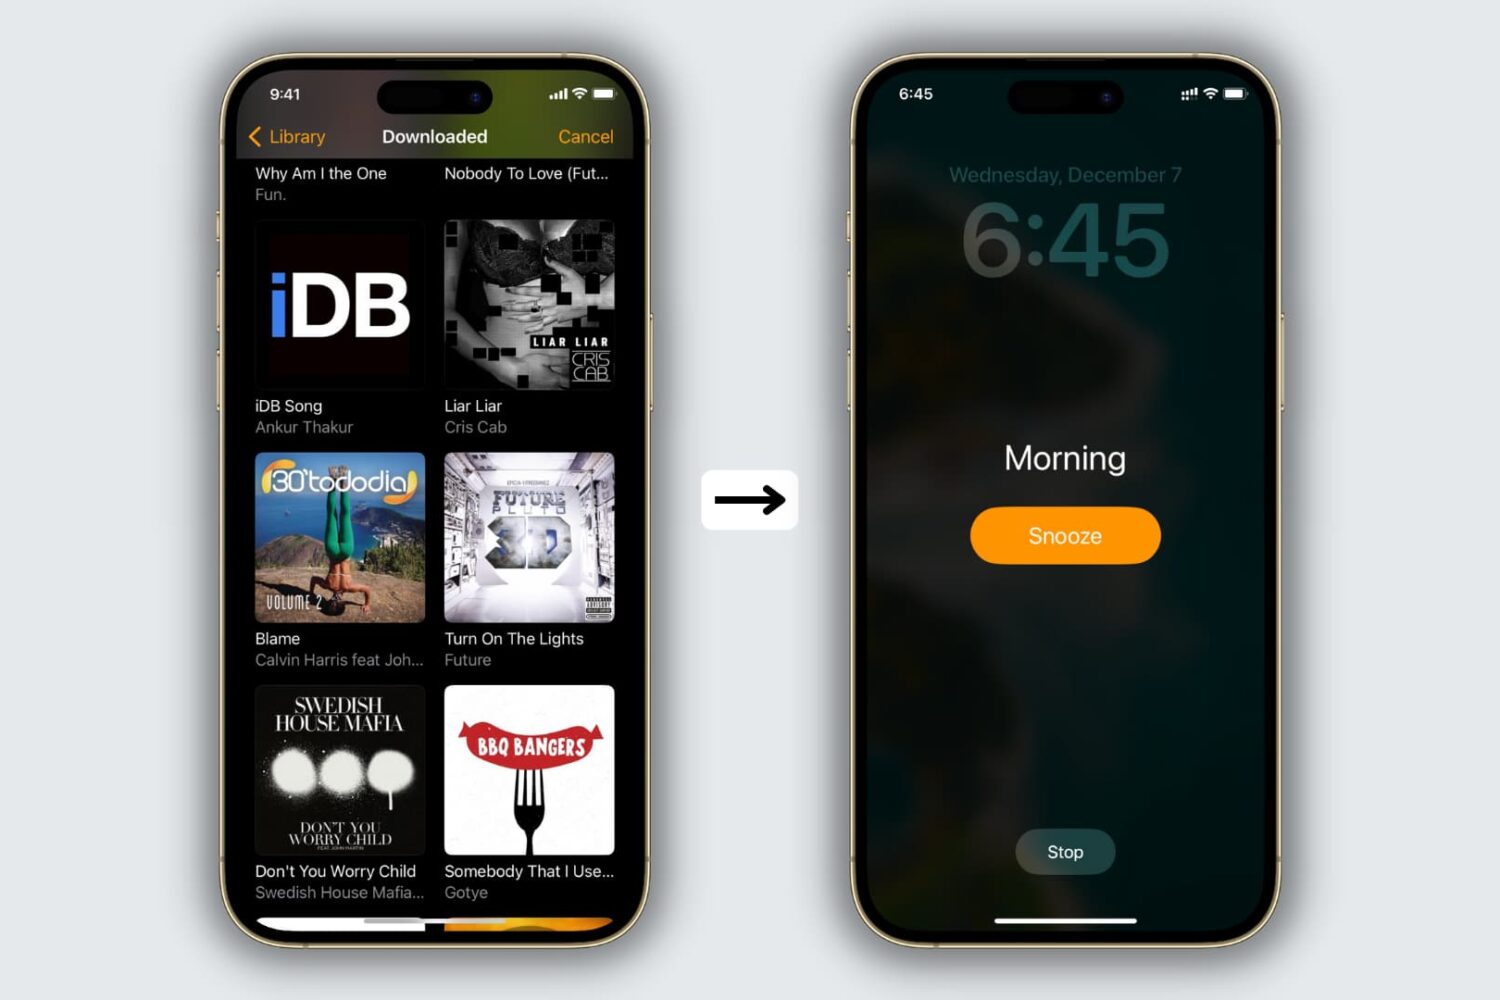 Set your favorite song as alarm tone on iPhone